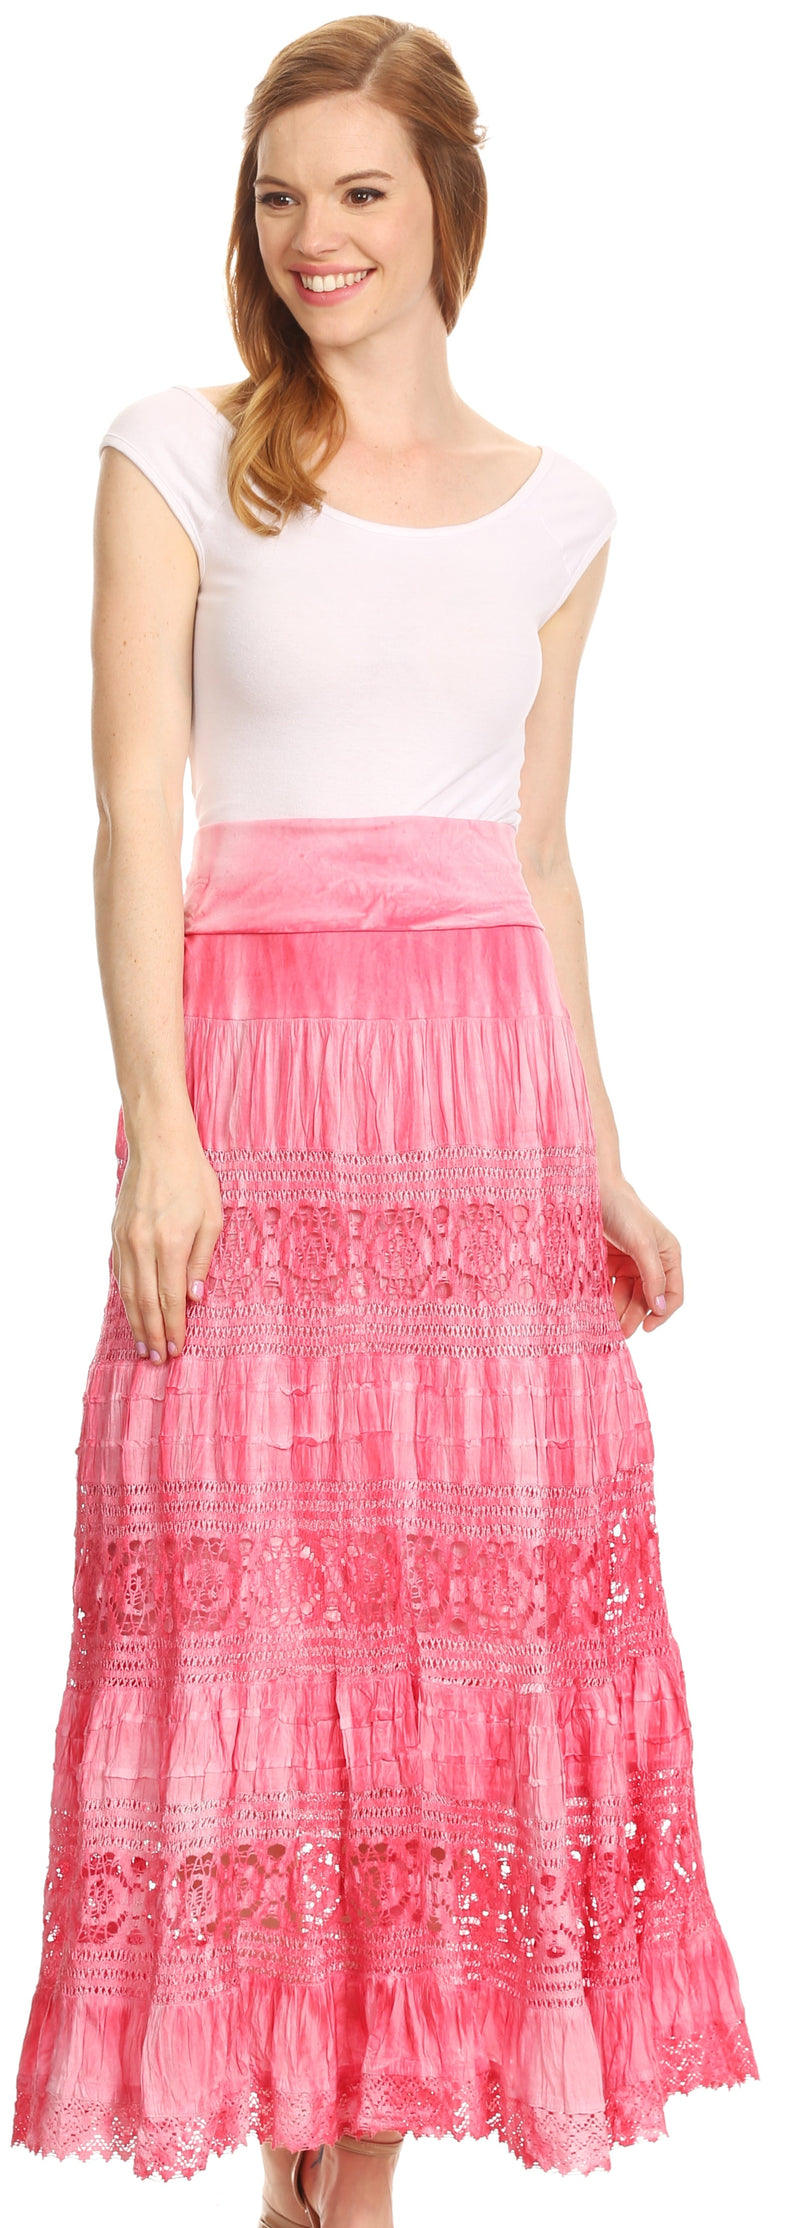 Sakkas Gracie Crochet Lace Tiered Long Cotton Skirt with Fold-Over Waistband